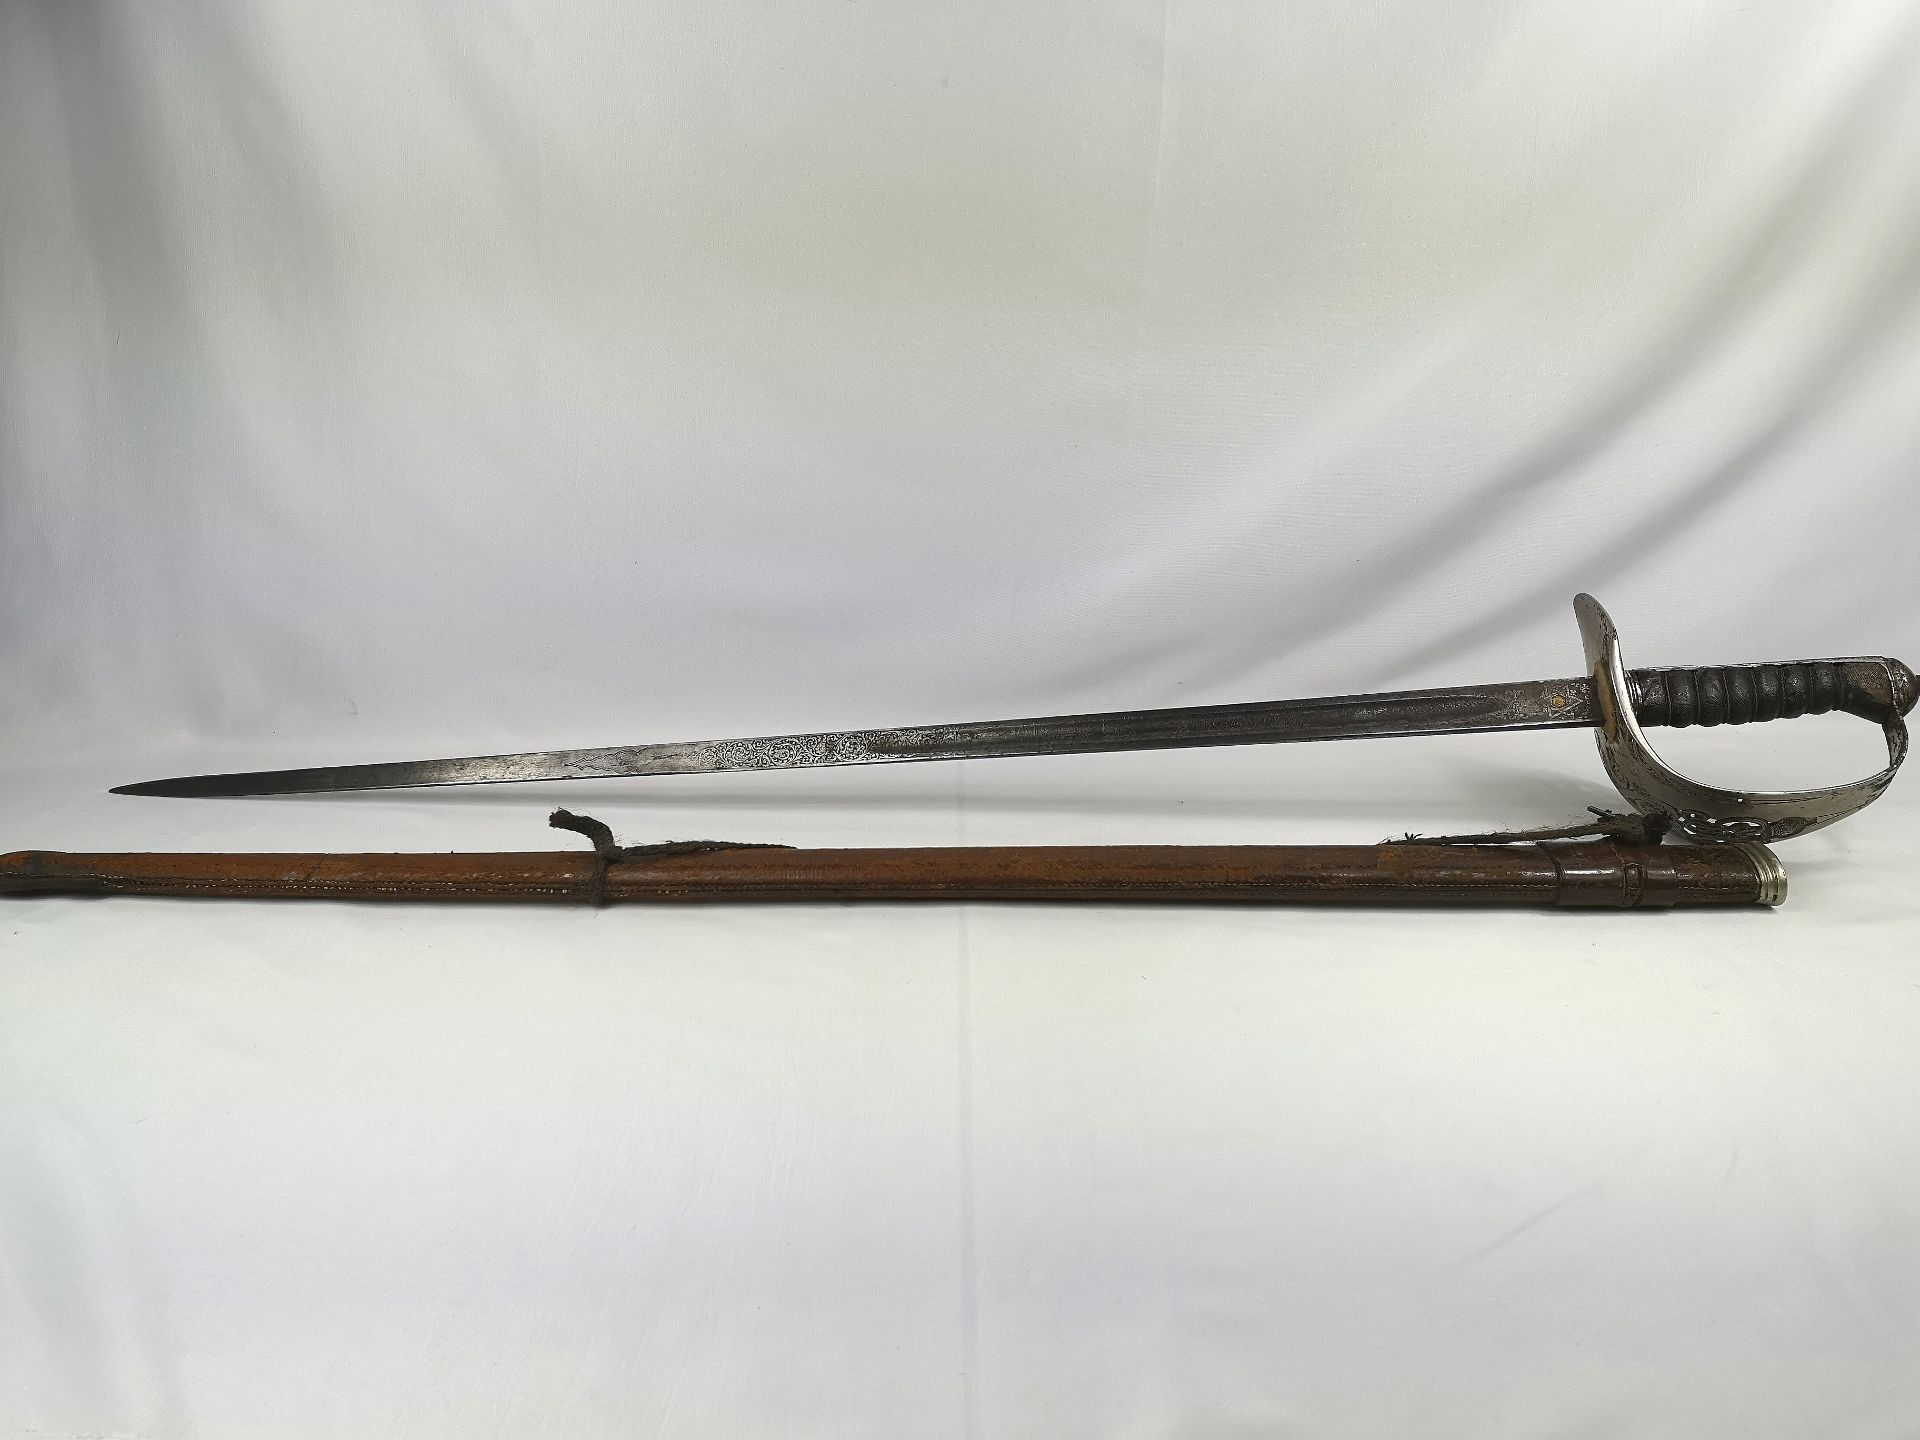 Dress sword with leather scabbard - Image 3 of 6